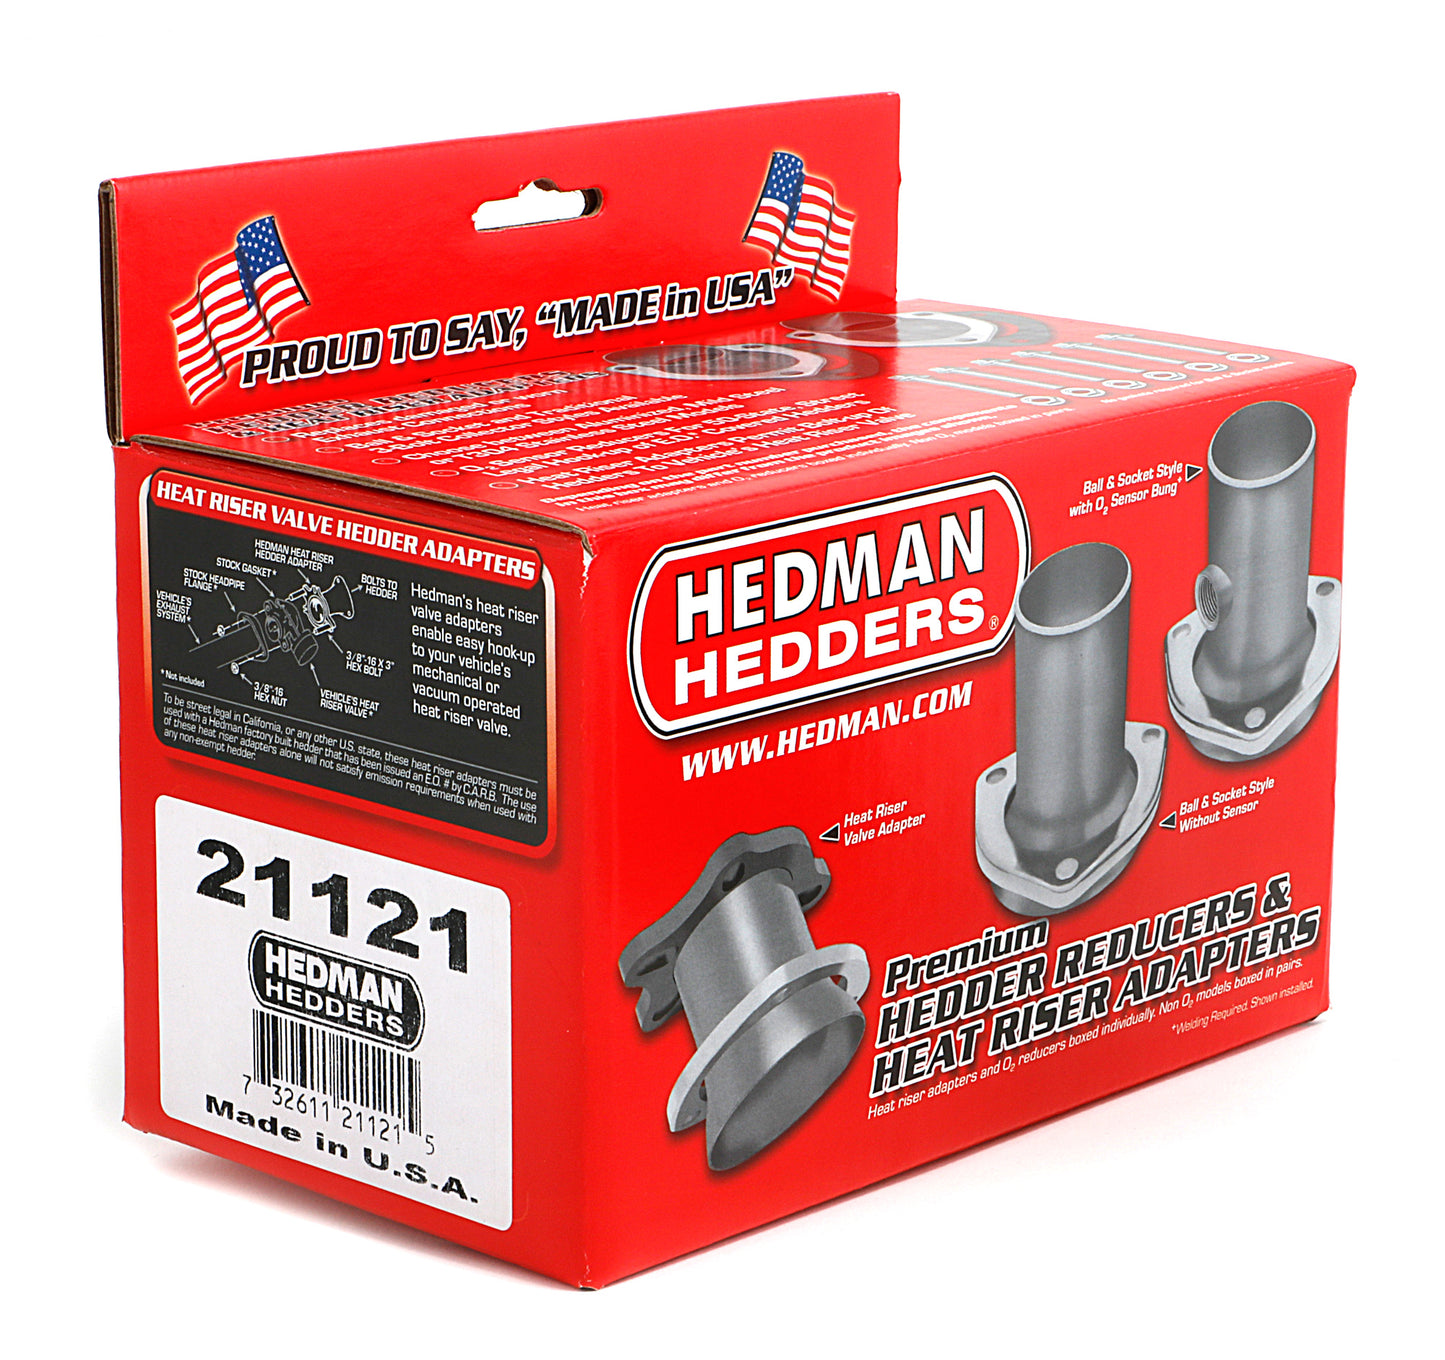 Hedman Hedders 3 IN. 3-BOLT FLANGE HEADER REDUCERS; 3 IN. EXHAUST SYSTEM; ALUMINIZED 21121